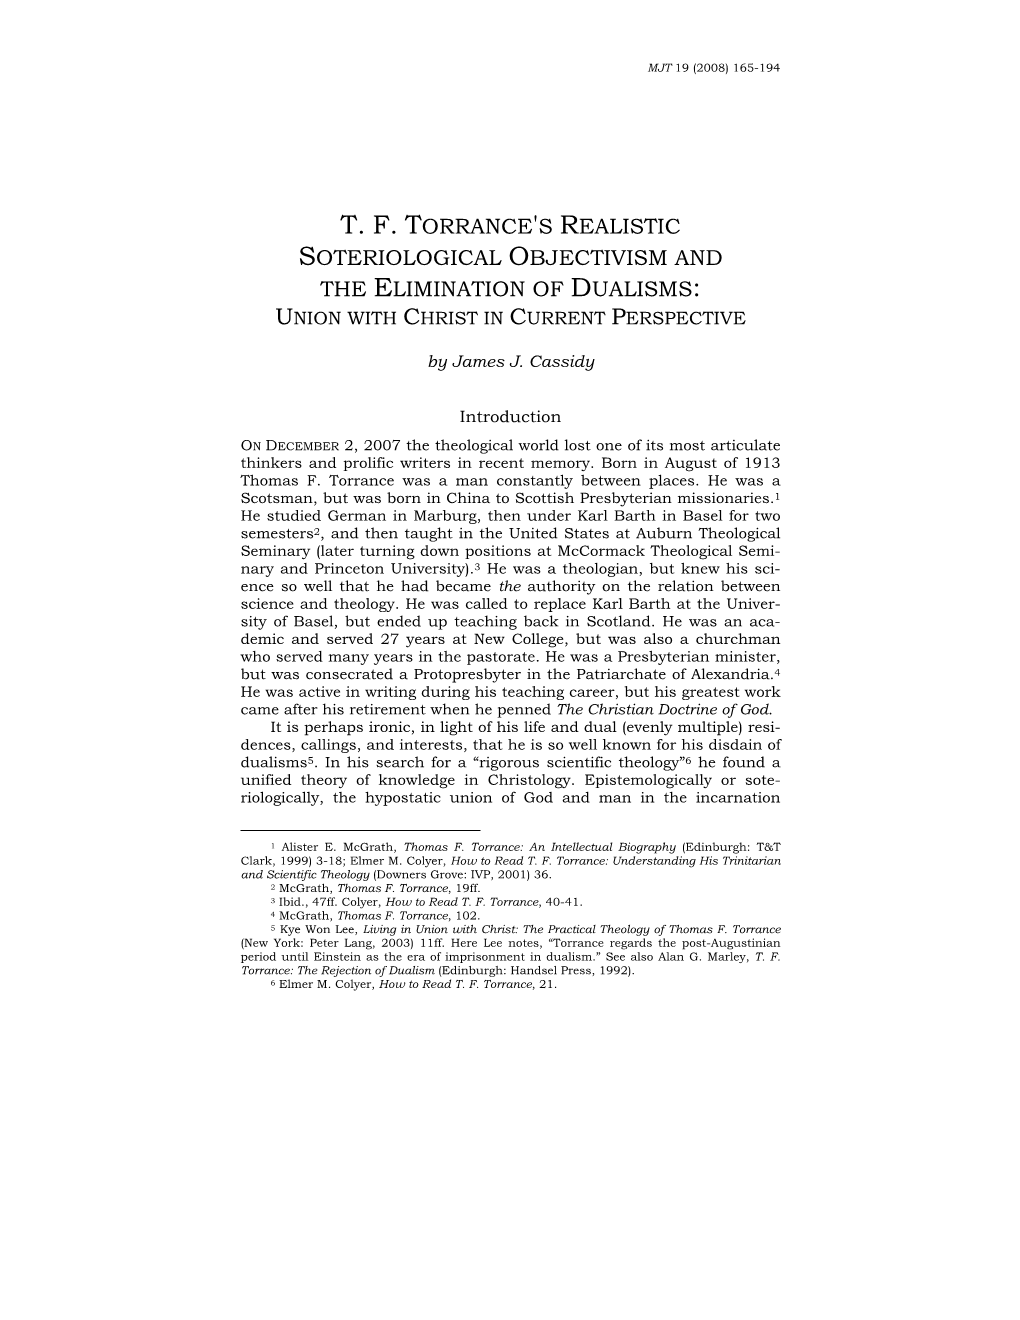 T.F. Torrance's Realistic Soteriological Objectivism and the Elimination of Dualisms